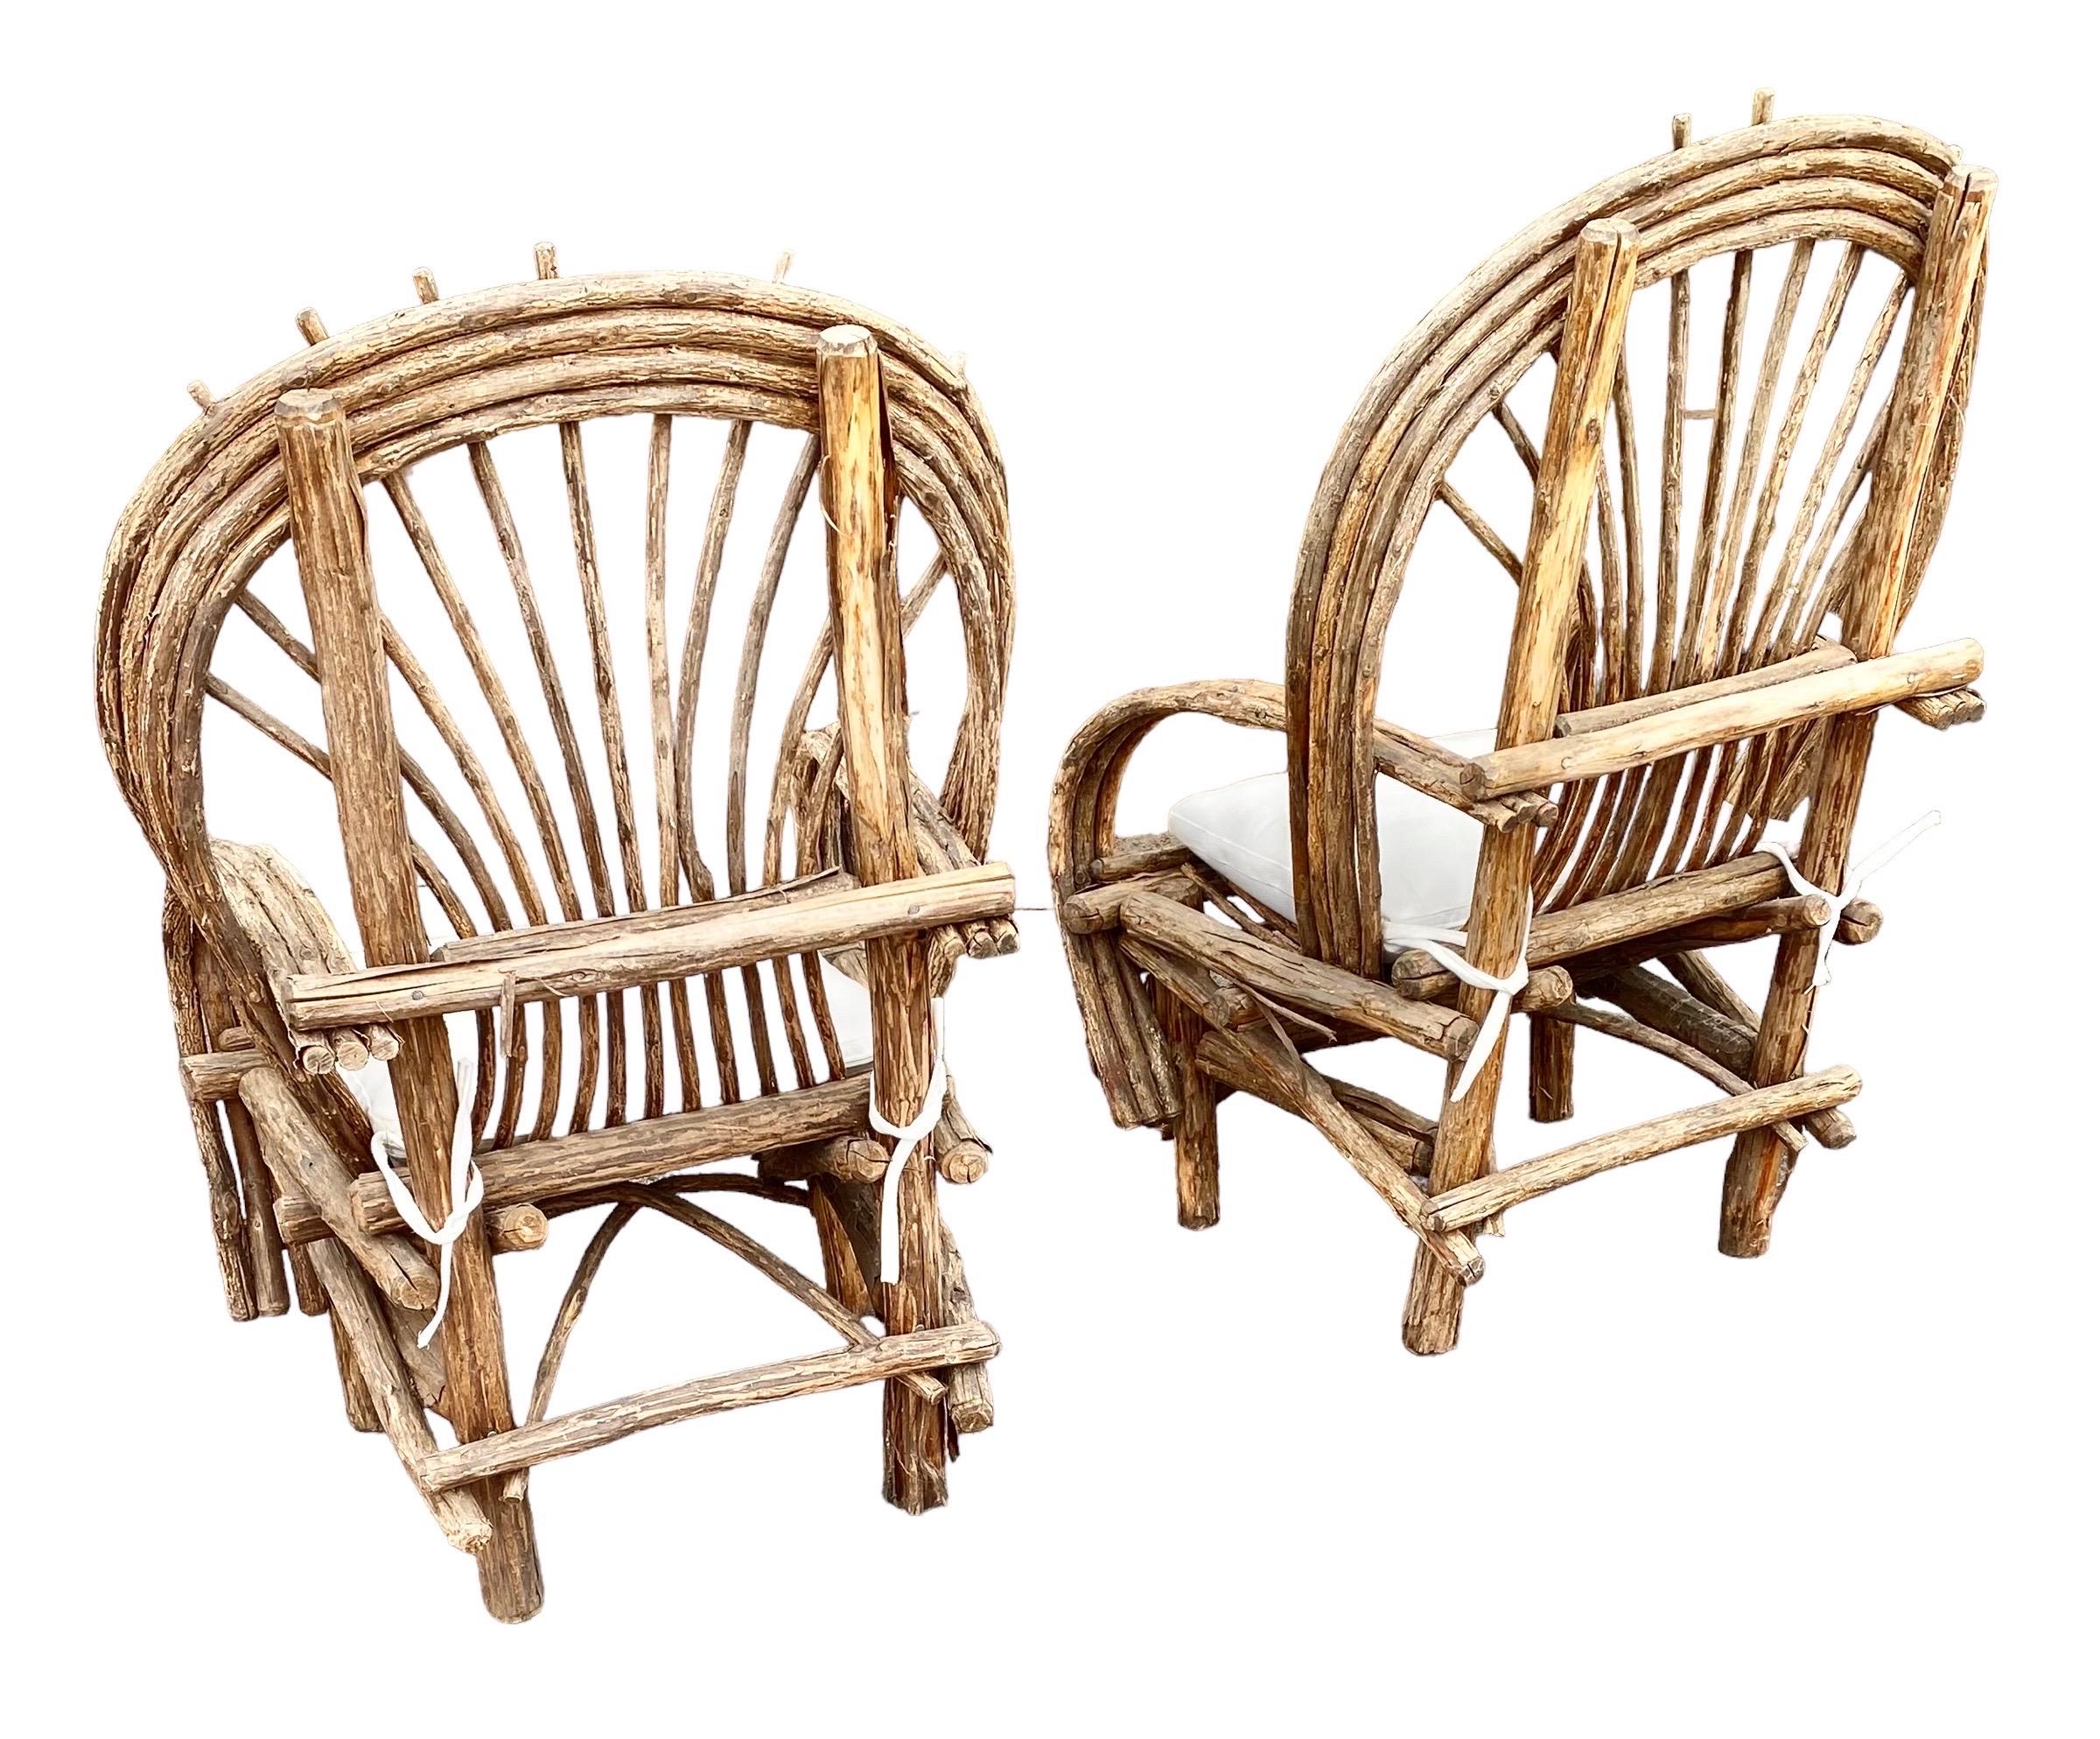 Primitive Pair of Hade Crafted Bent Willow Rustic Arm Chairs